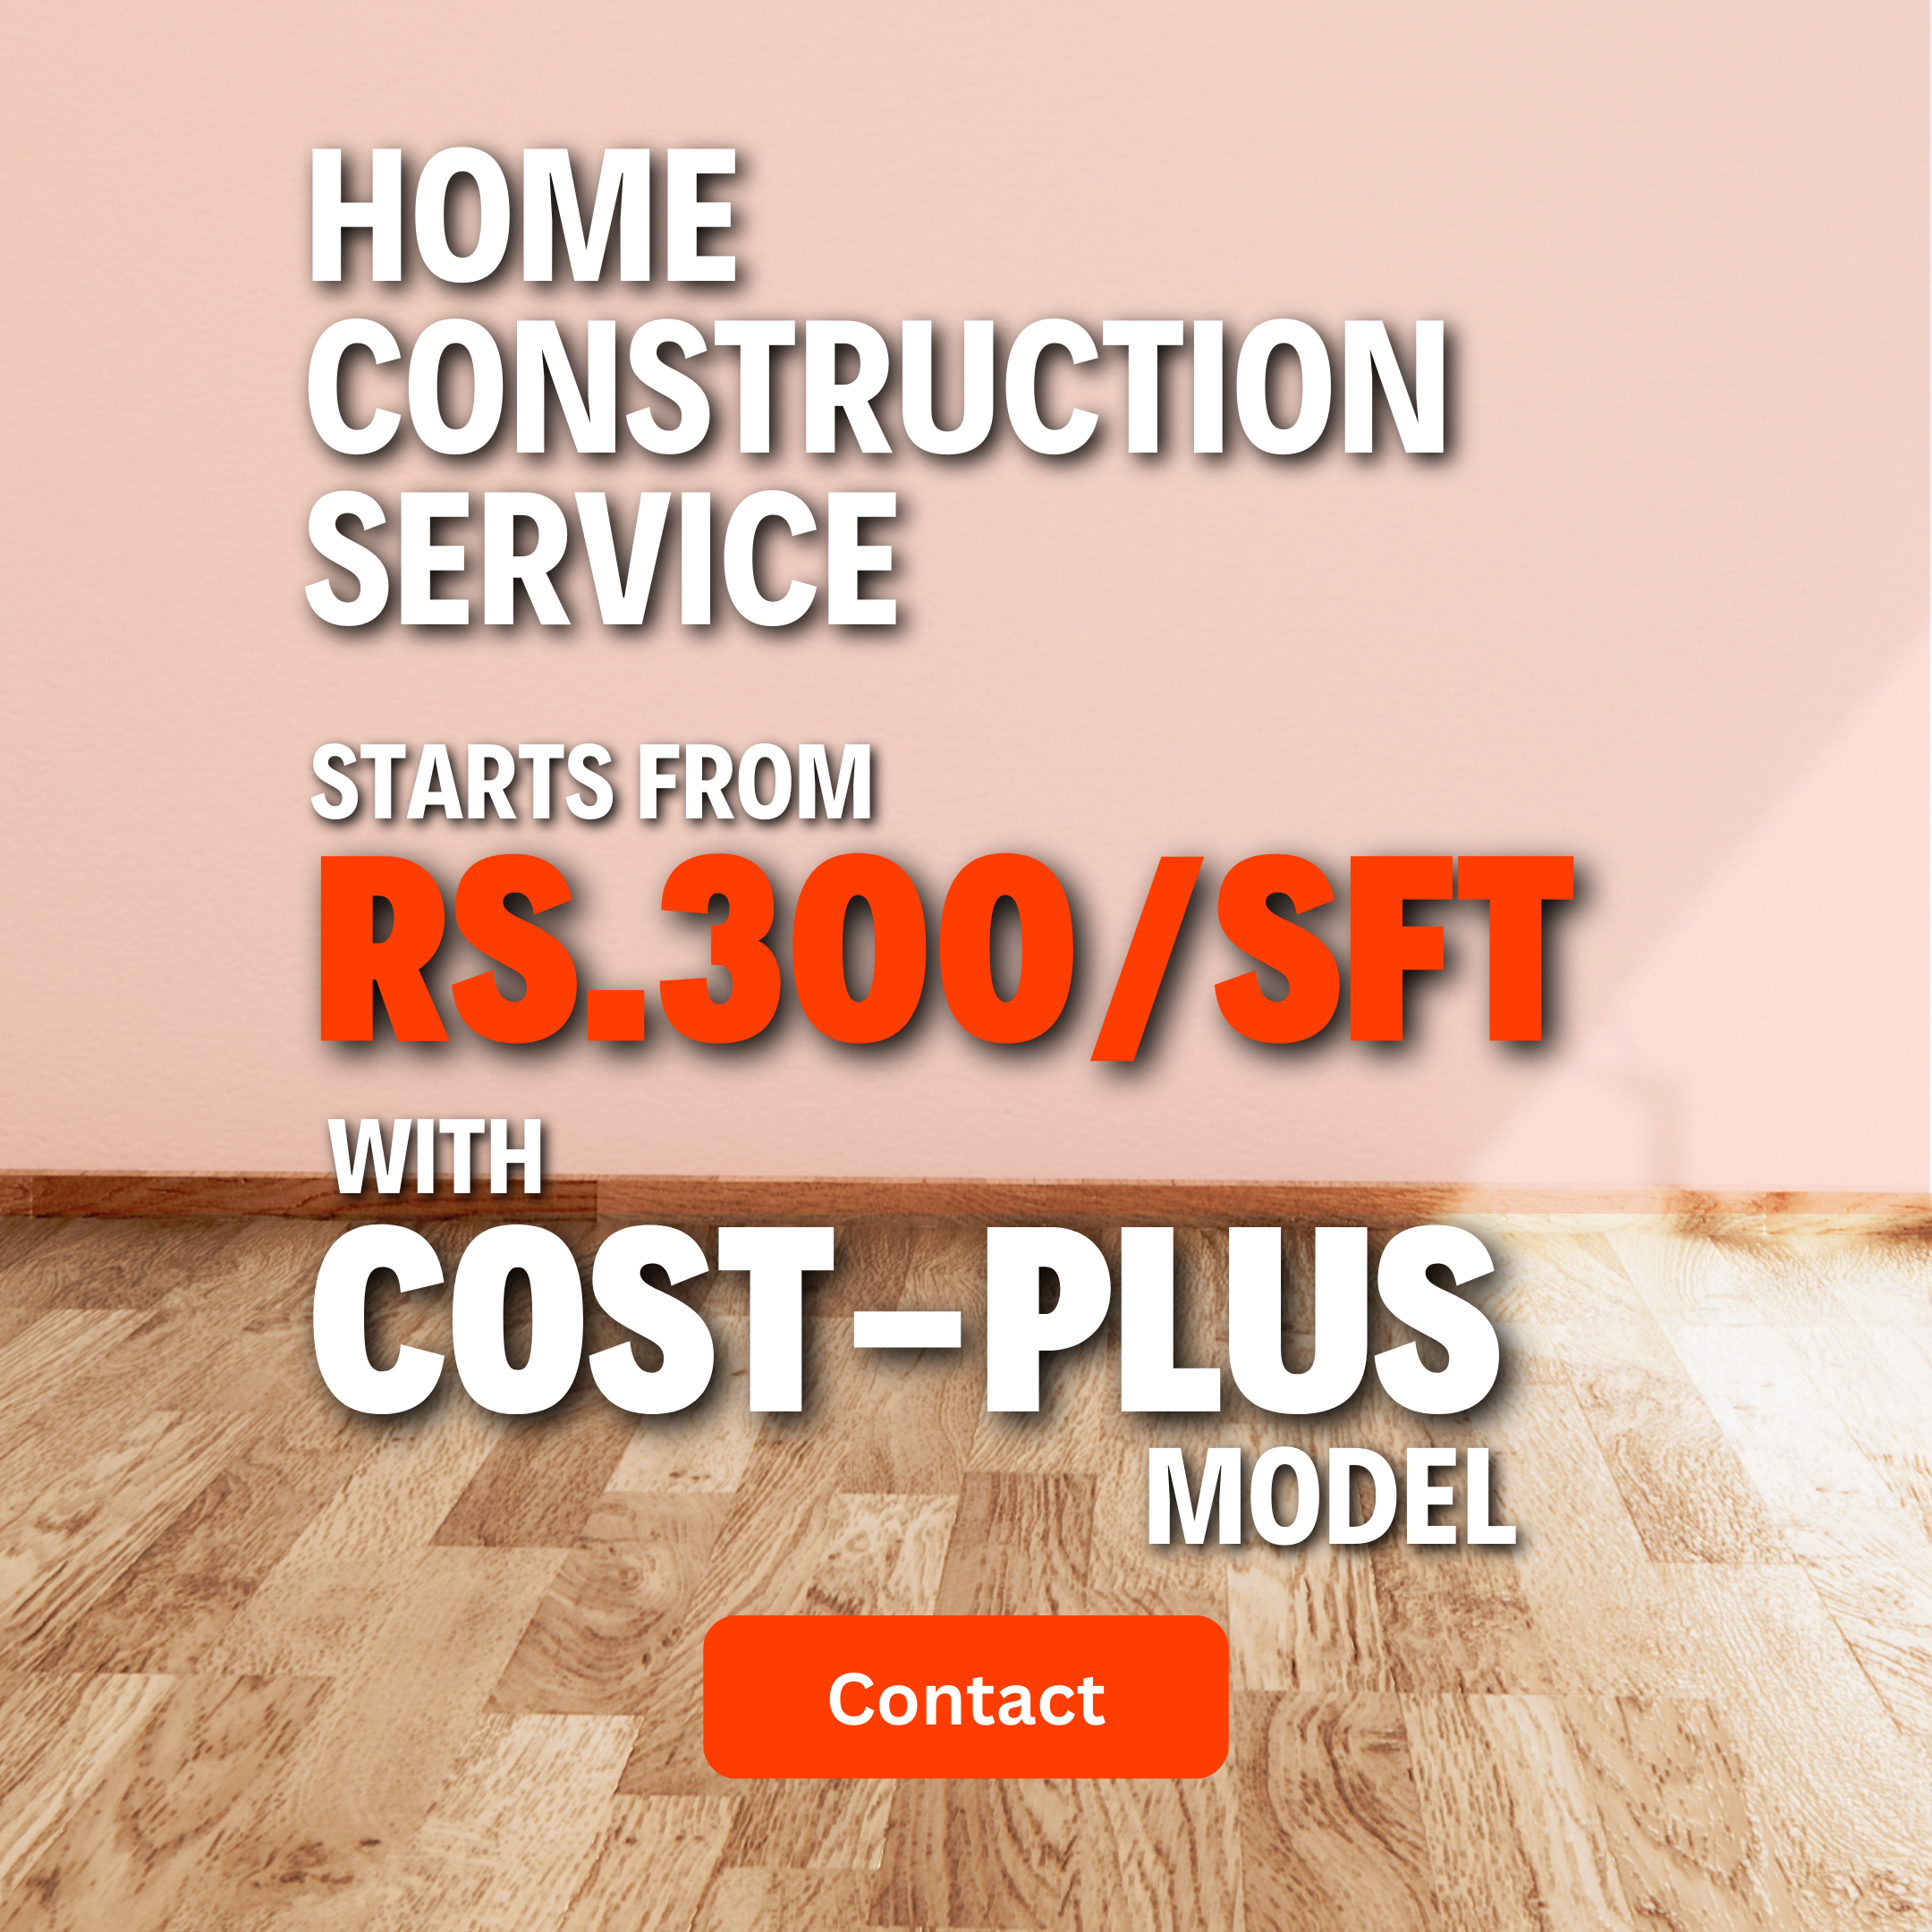 Home construction service image